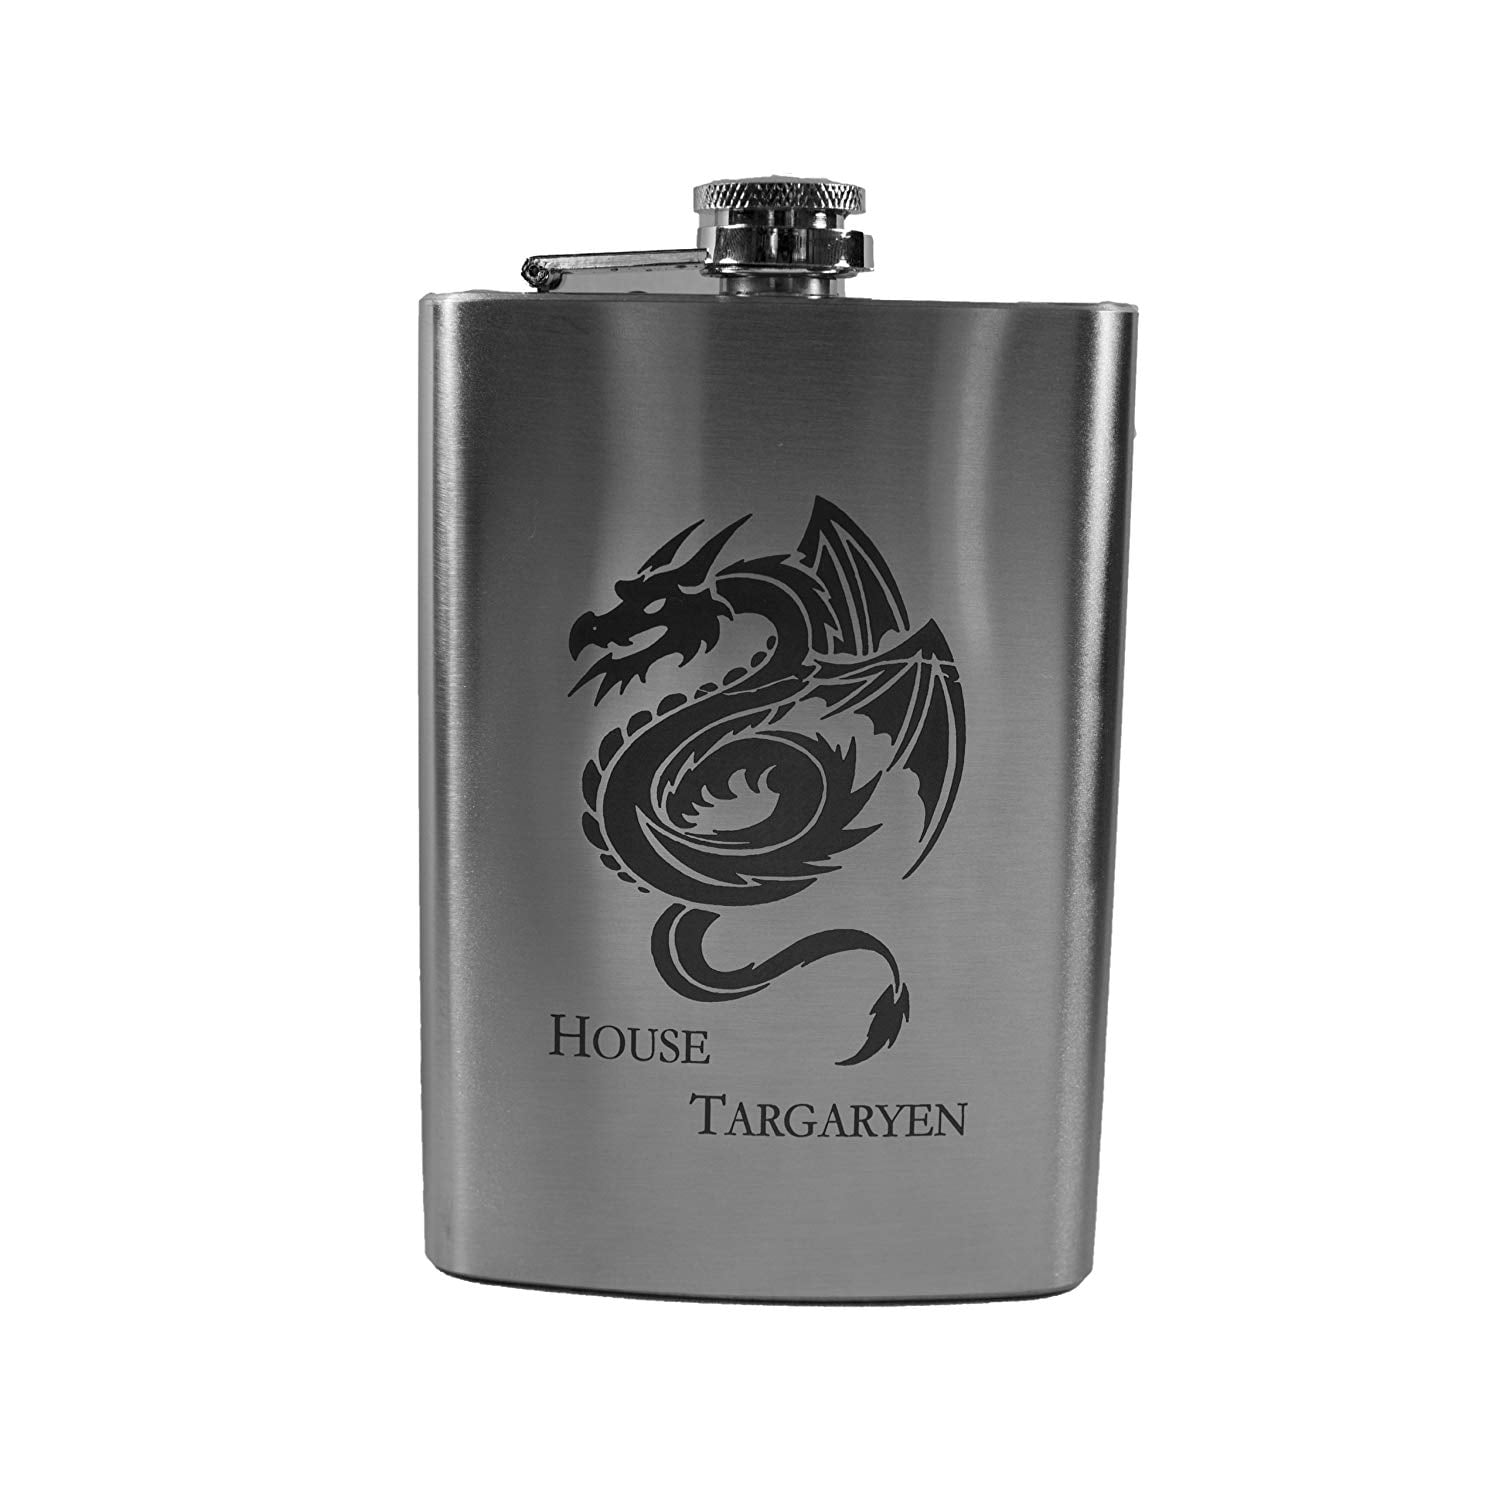 5 Oz Flask Inspired By Game Of Thrones House Of Stark Direwolf Winter Is Coming 